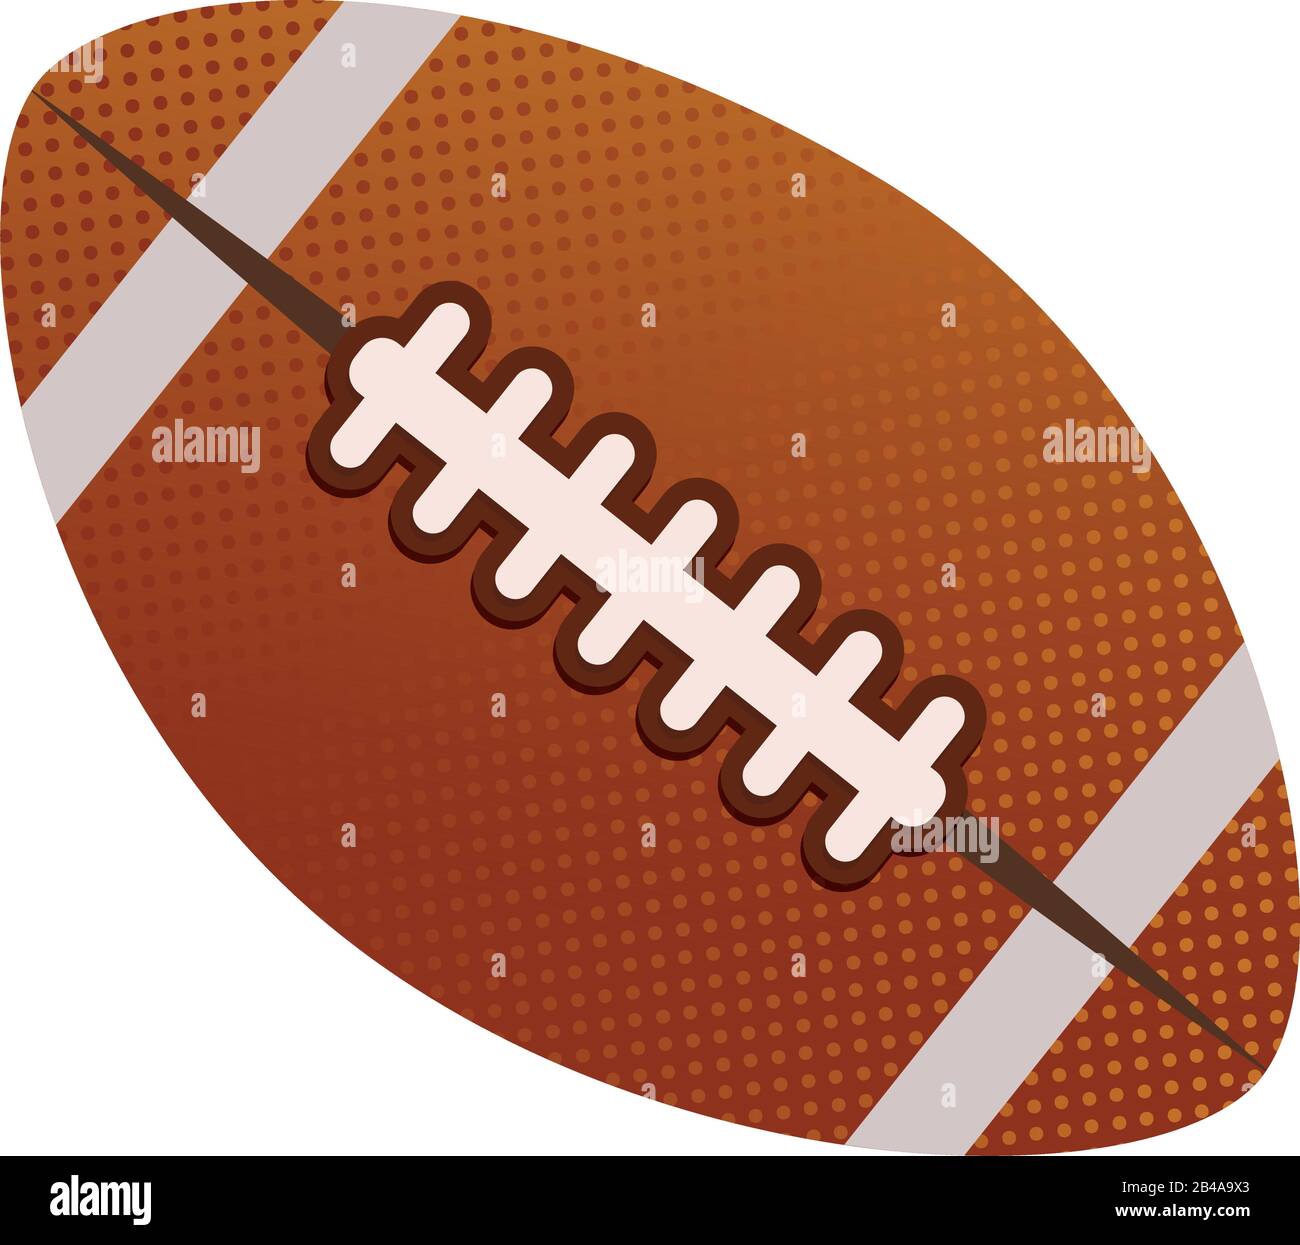 Illustration of rugby ball, with white background vector Stock Vector